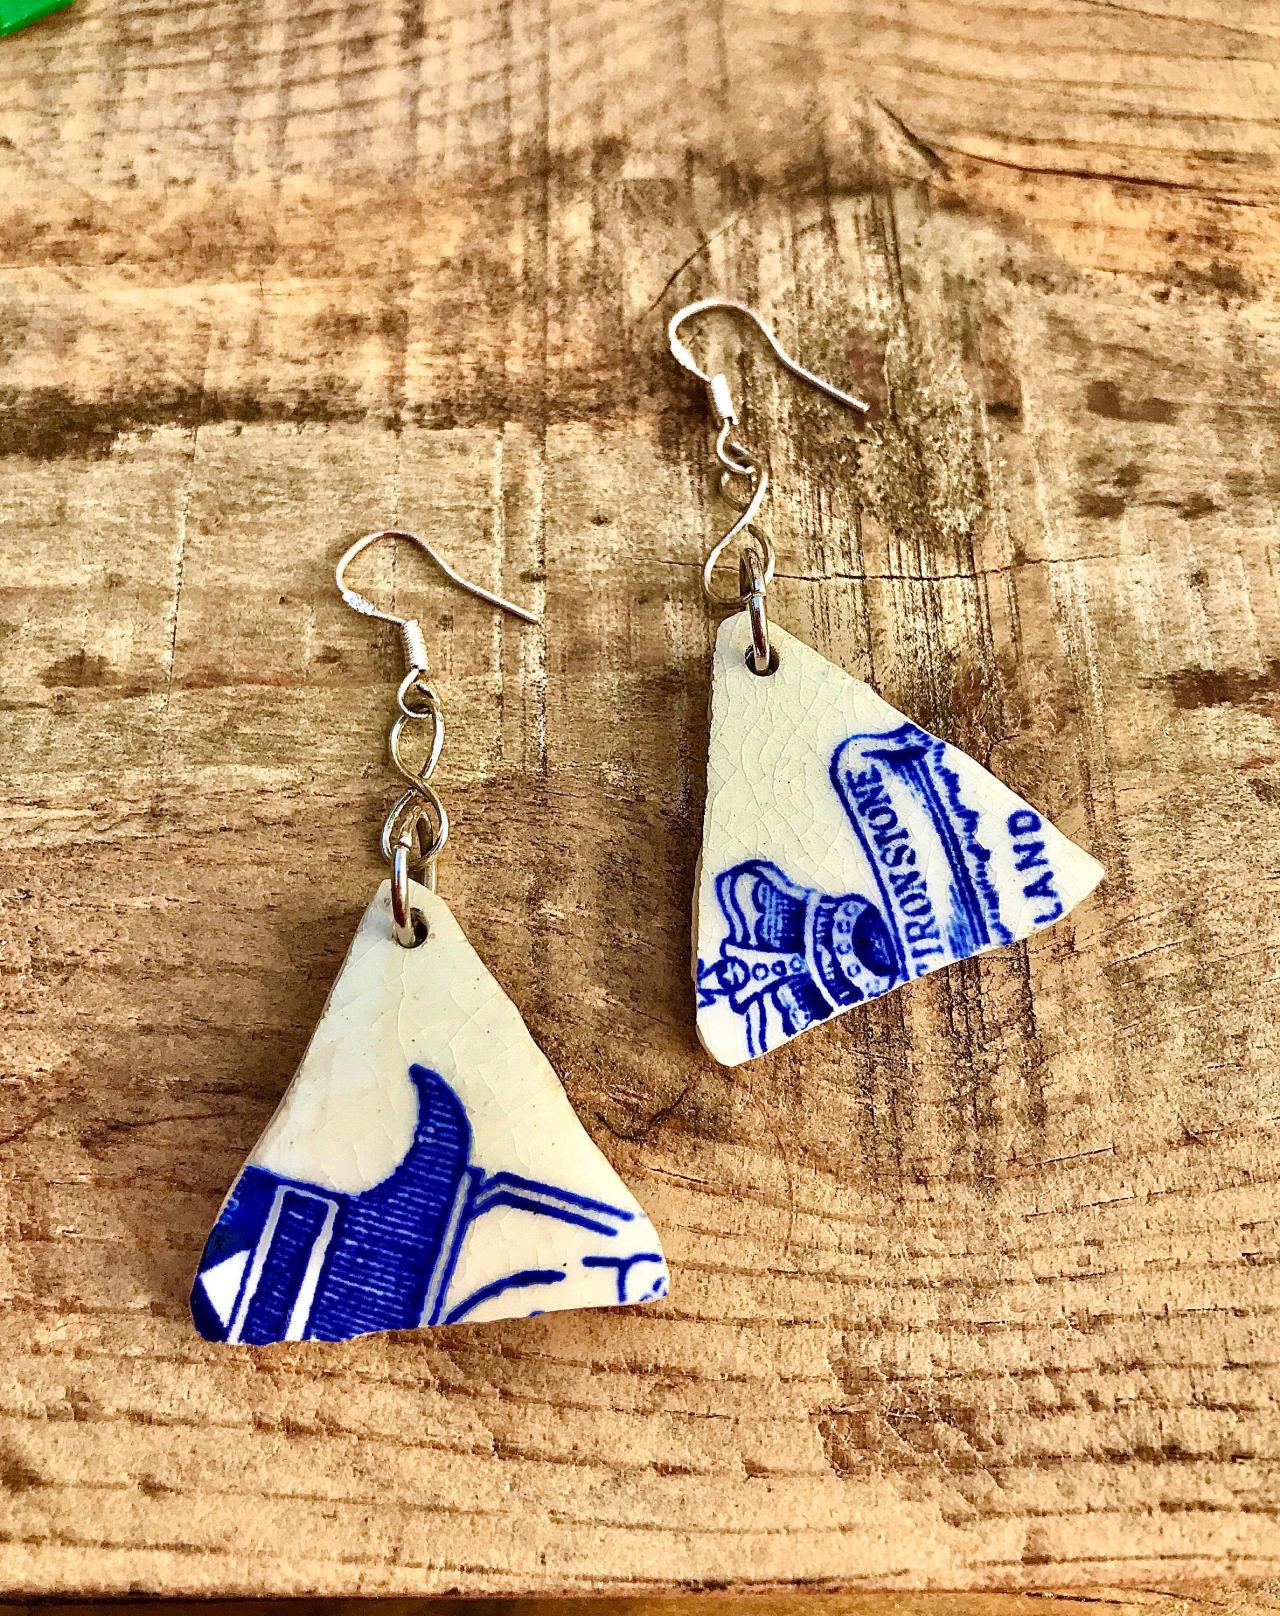 Unique vintage ironstone pattern blue & white china earrings with sterling silver earwires.